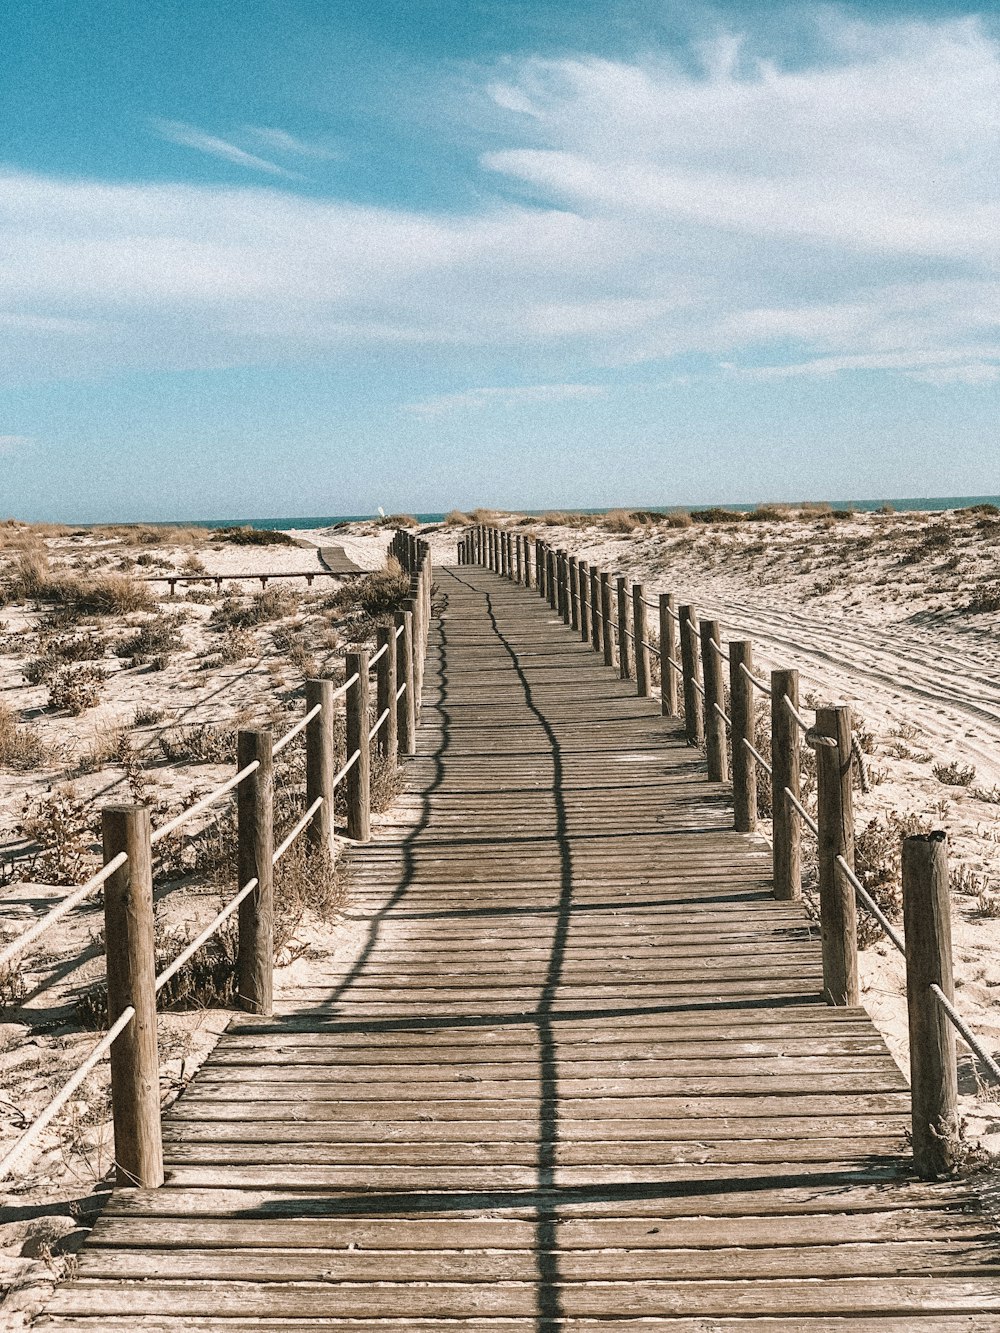 brown wooden pathway with railings on seashore during day